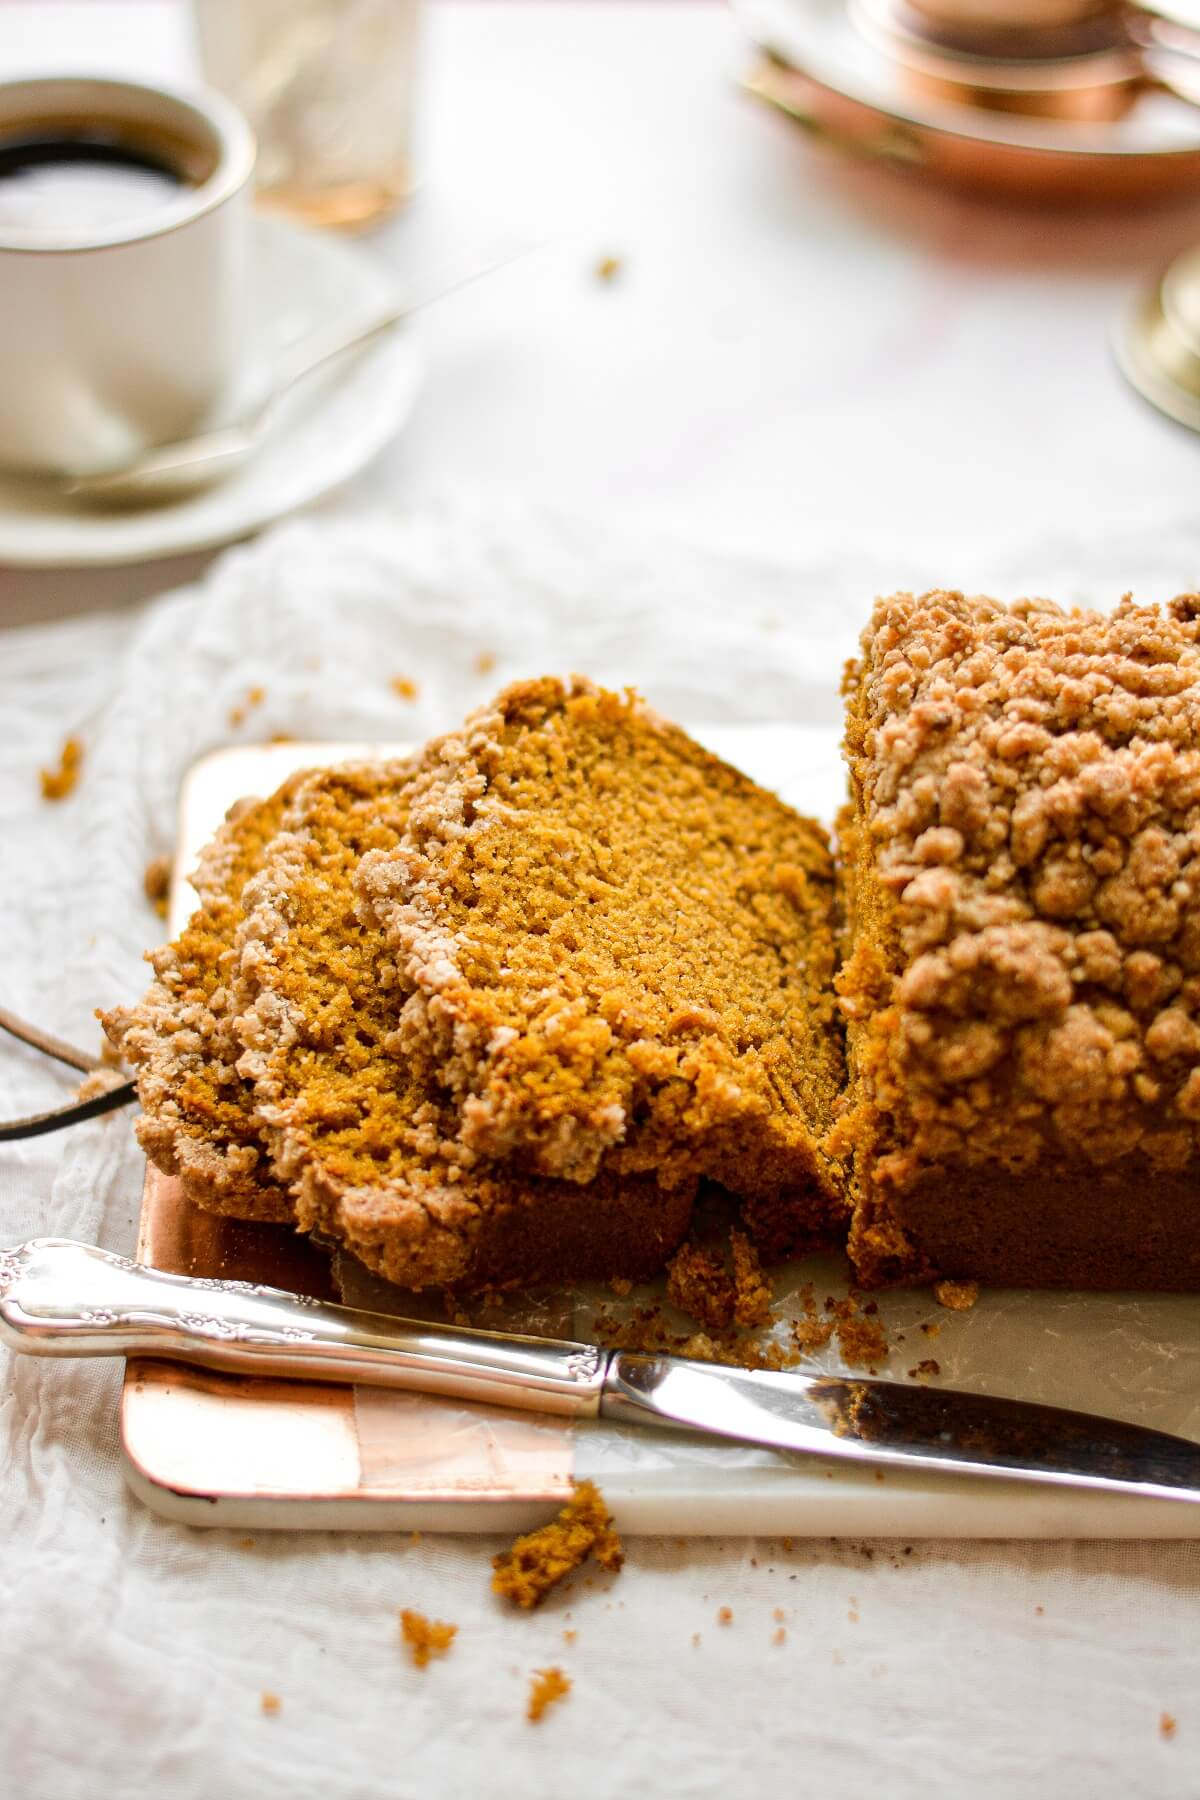 A loaf of pumpkin streusel bread, with a few pieces sliced on a cutting board.